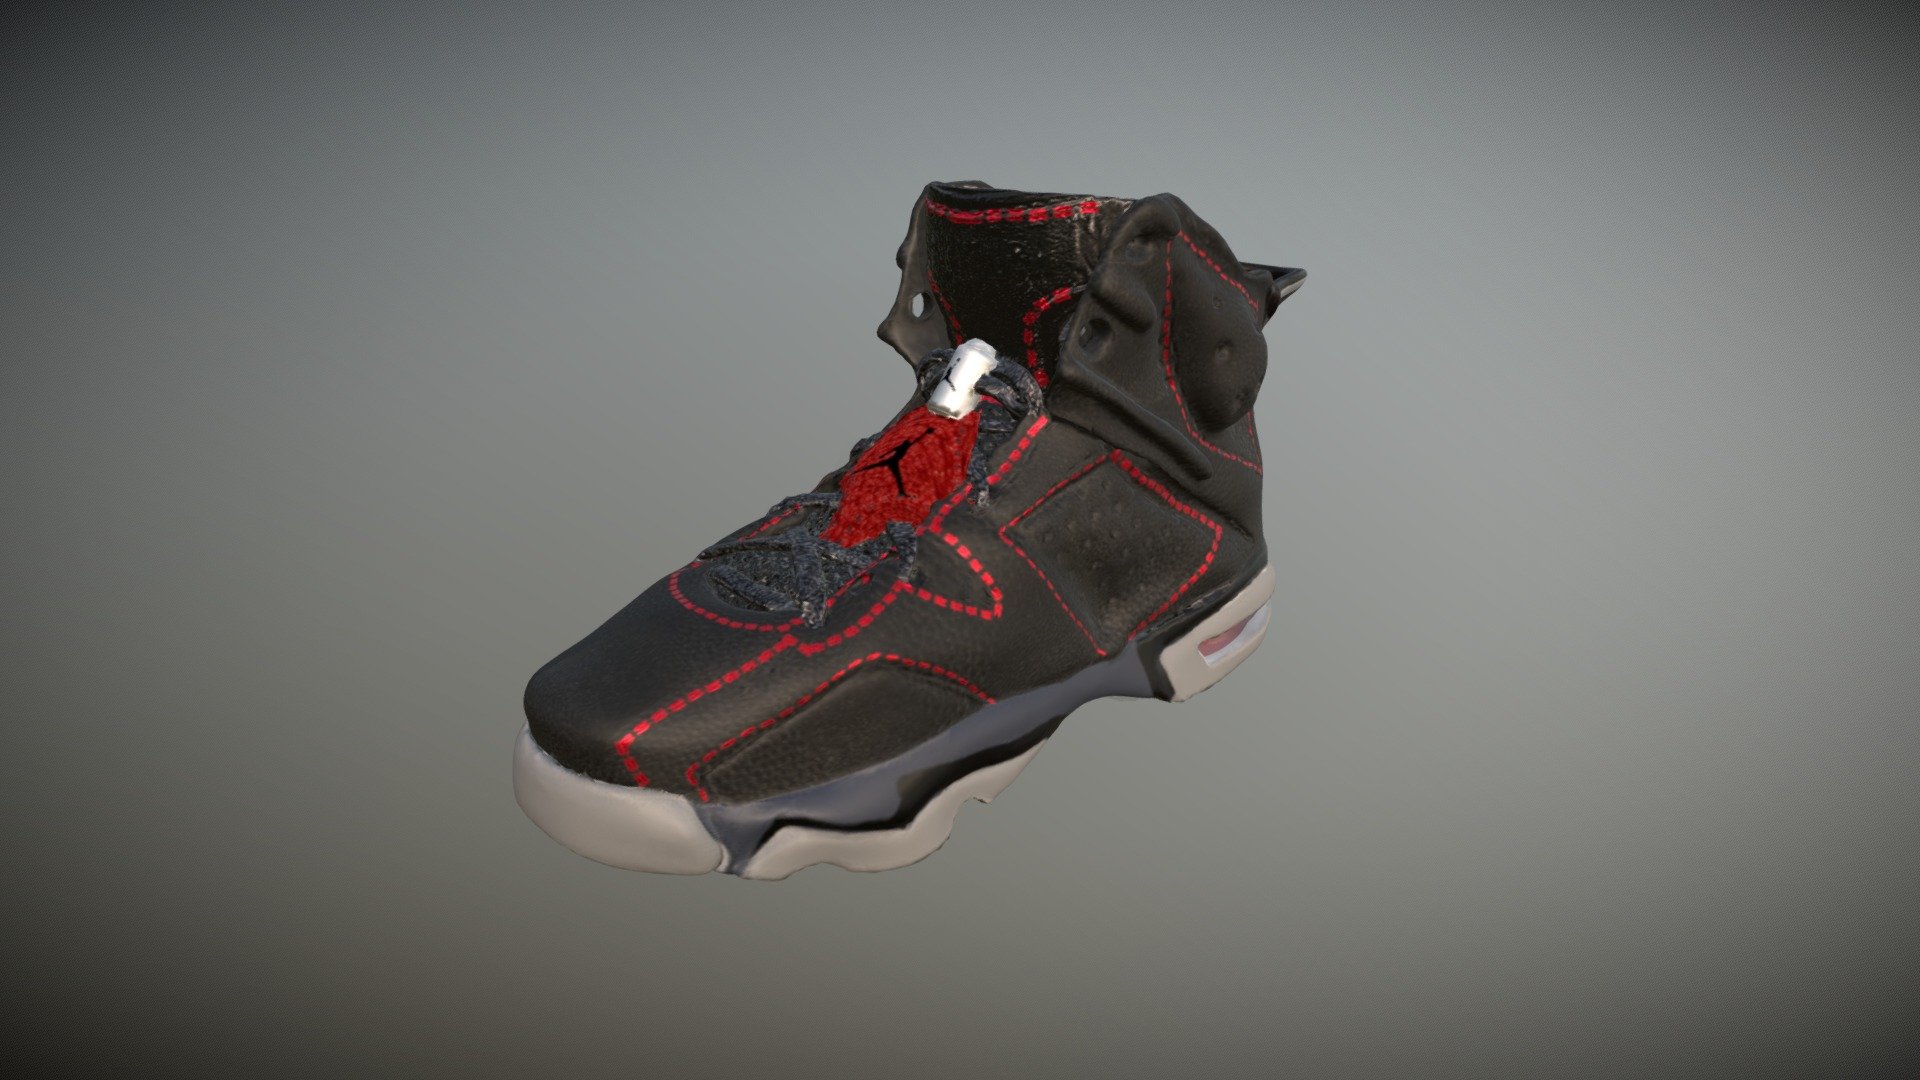 Air Jordan 6 is one of my all time favorites, would like to see it in a colorway something like this 3d model